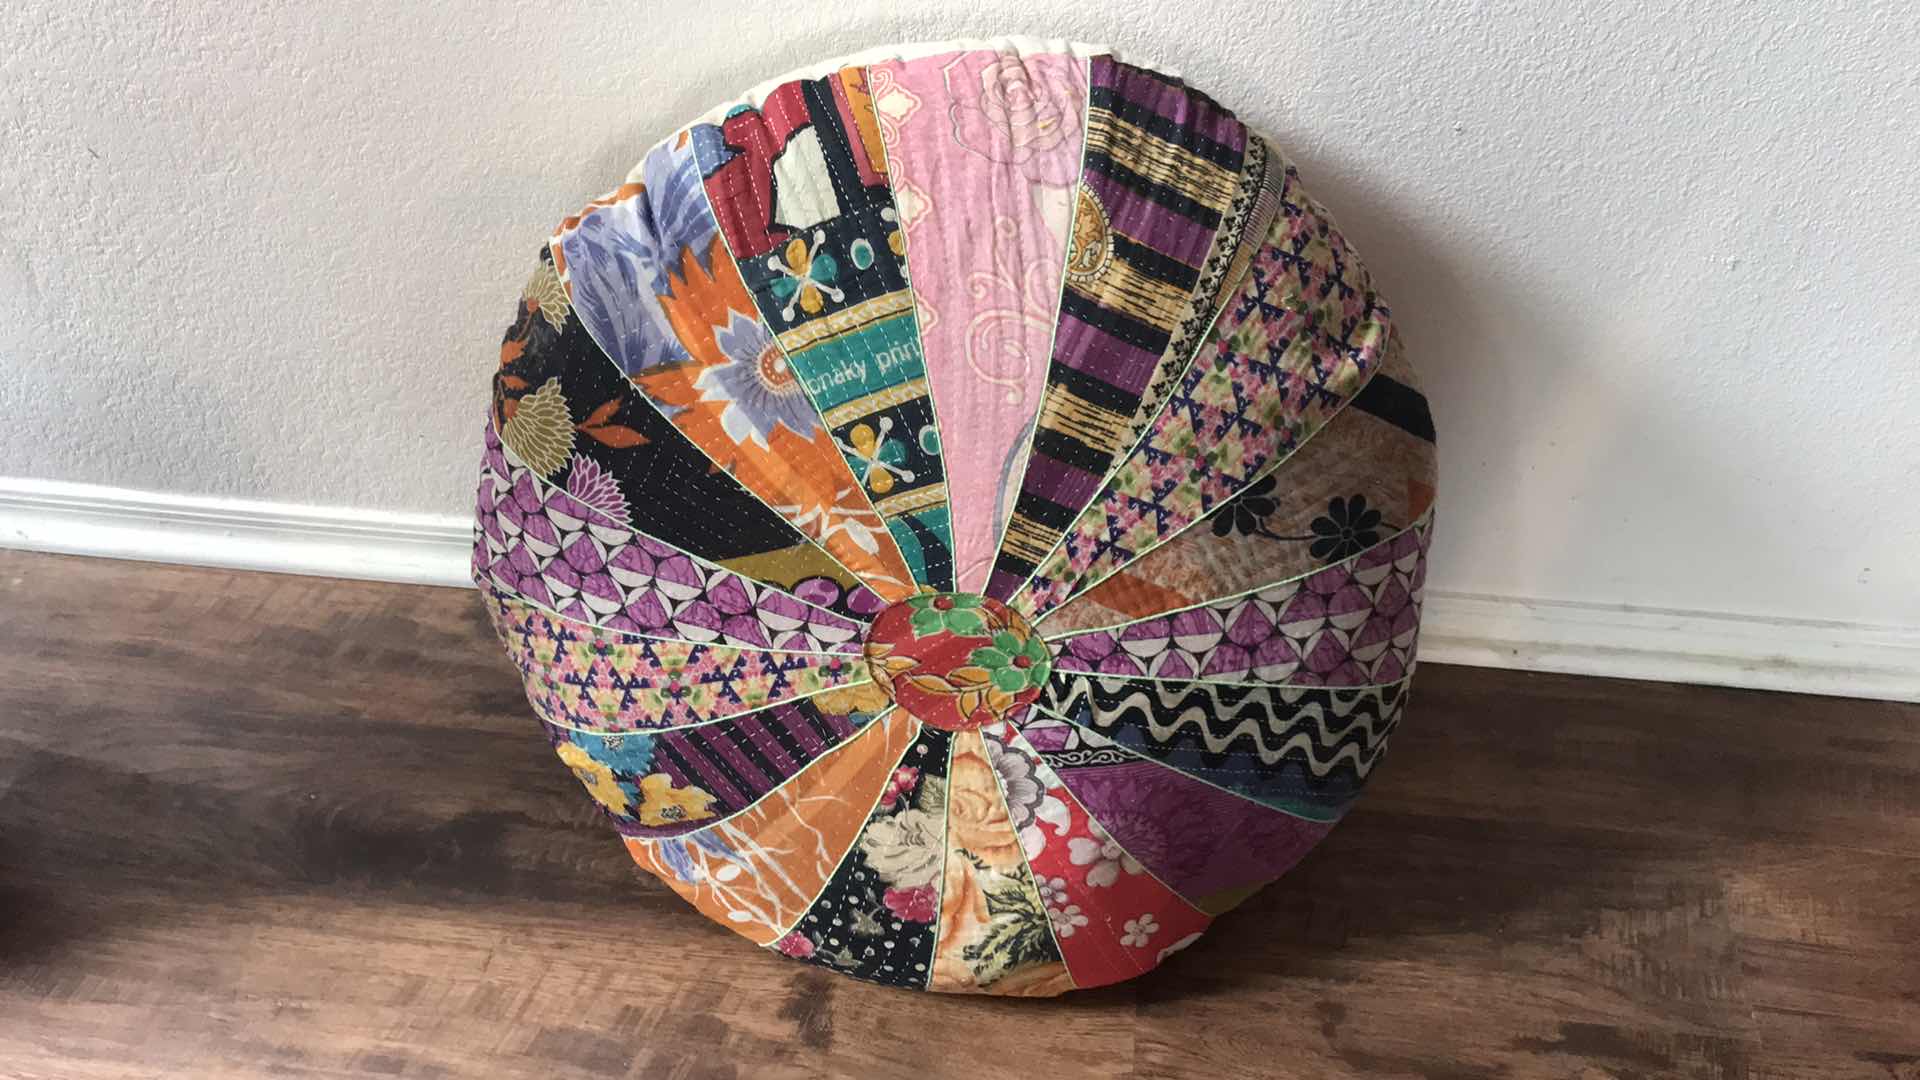 Photo 2 of INDIAN PATCHWORK KANTHA POUF VINTAGE POUF CASE, LARGE ROUND FLOOR PILLOW, HANDMADE SEATING POUFFE,

